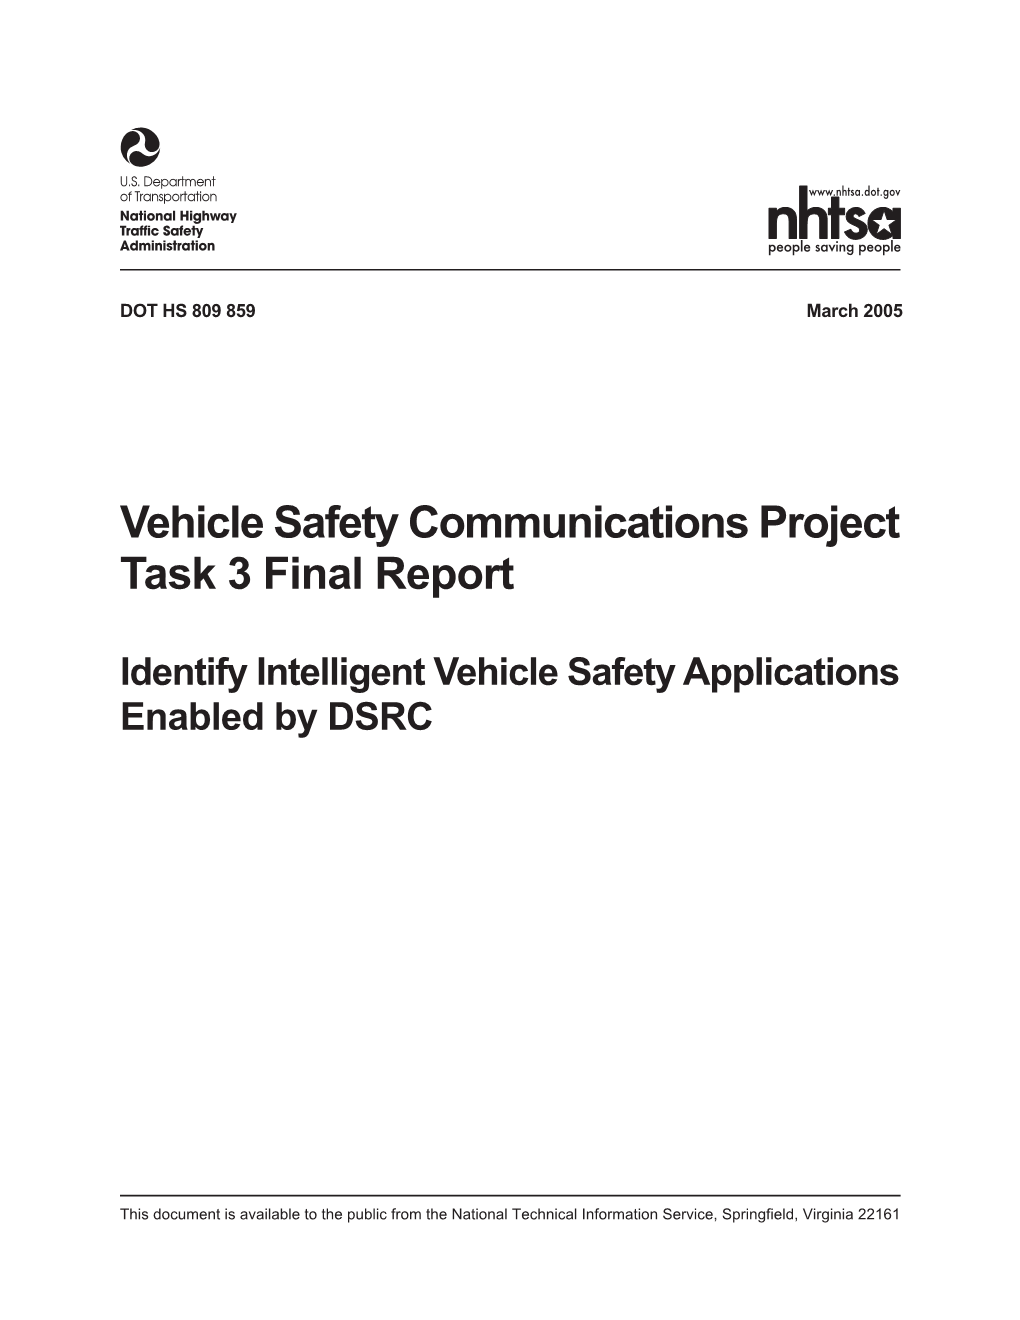 Vehicle Safety Communications Project: Task 3 Final Report